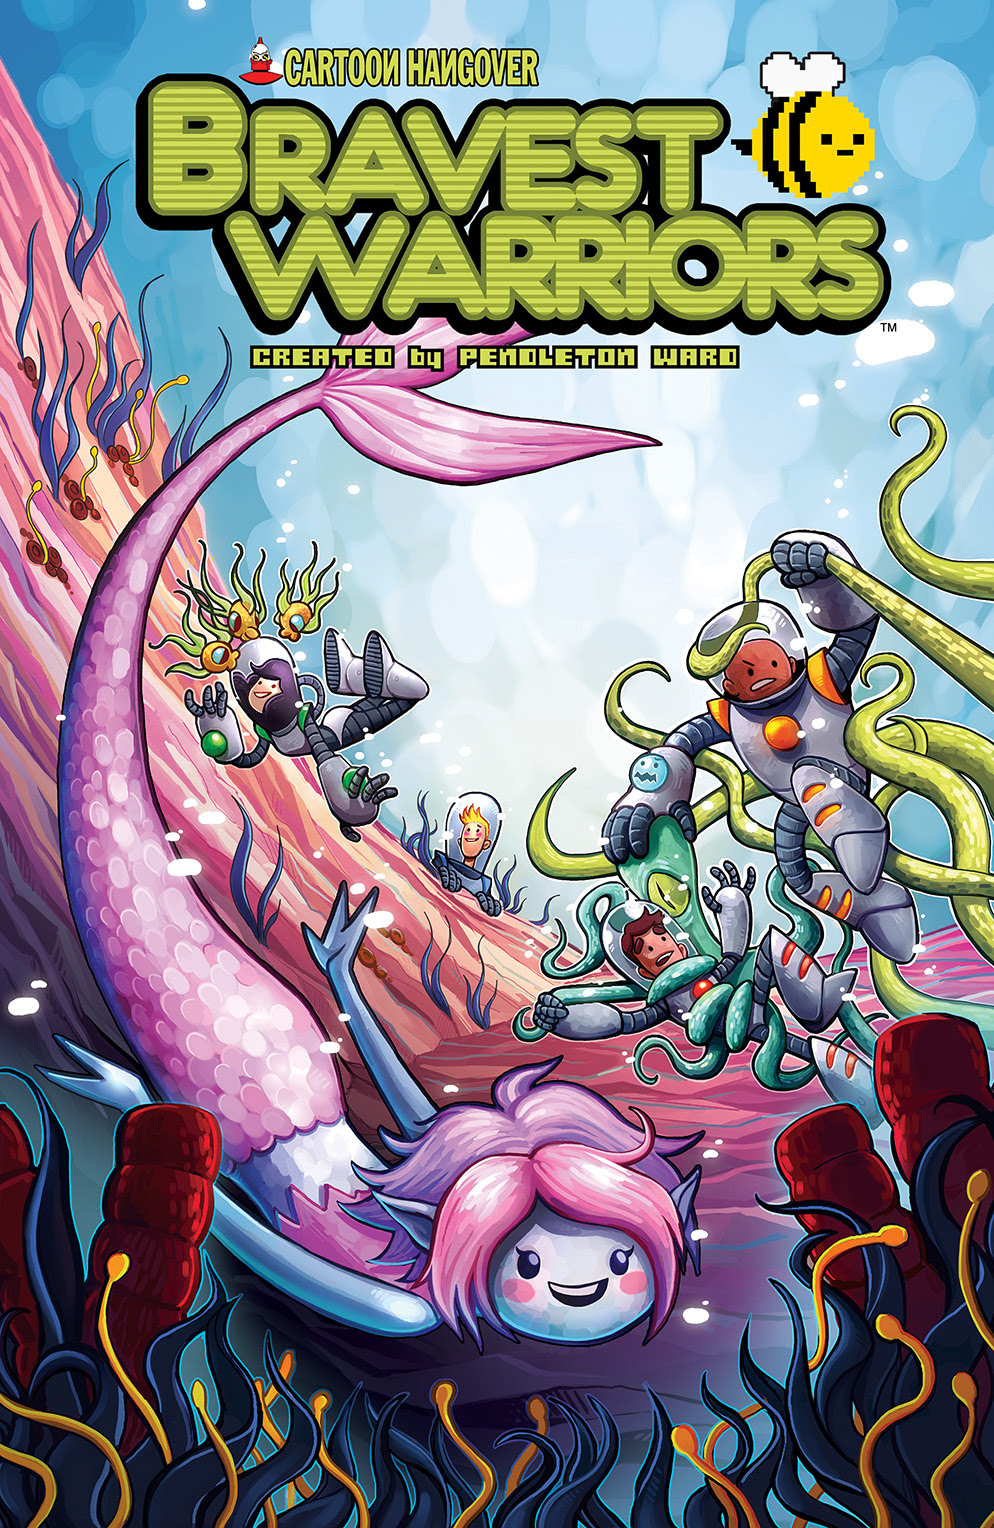 BRAVEST WARRIORS #27 Cover B by Renee Britton